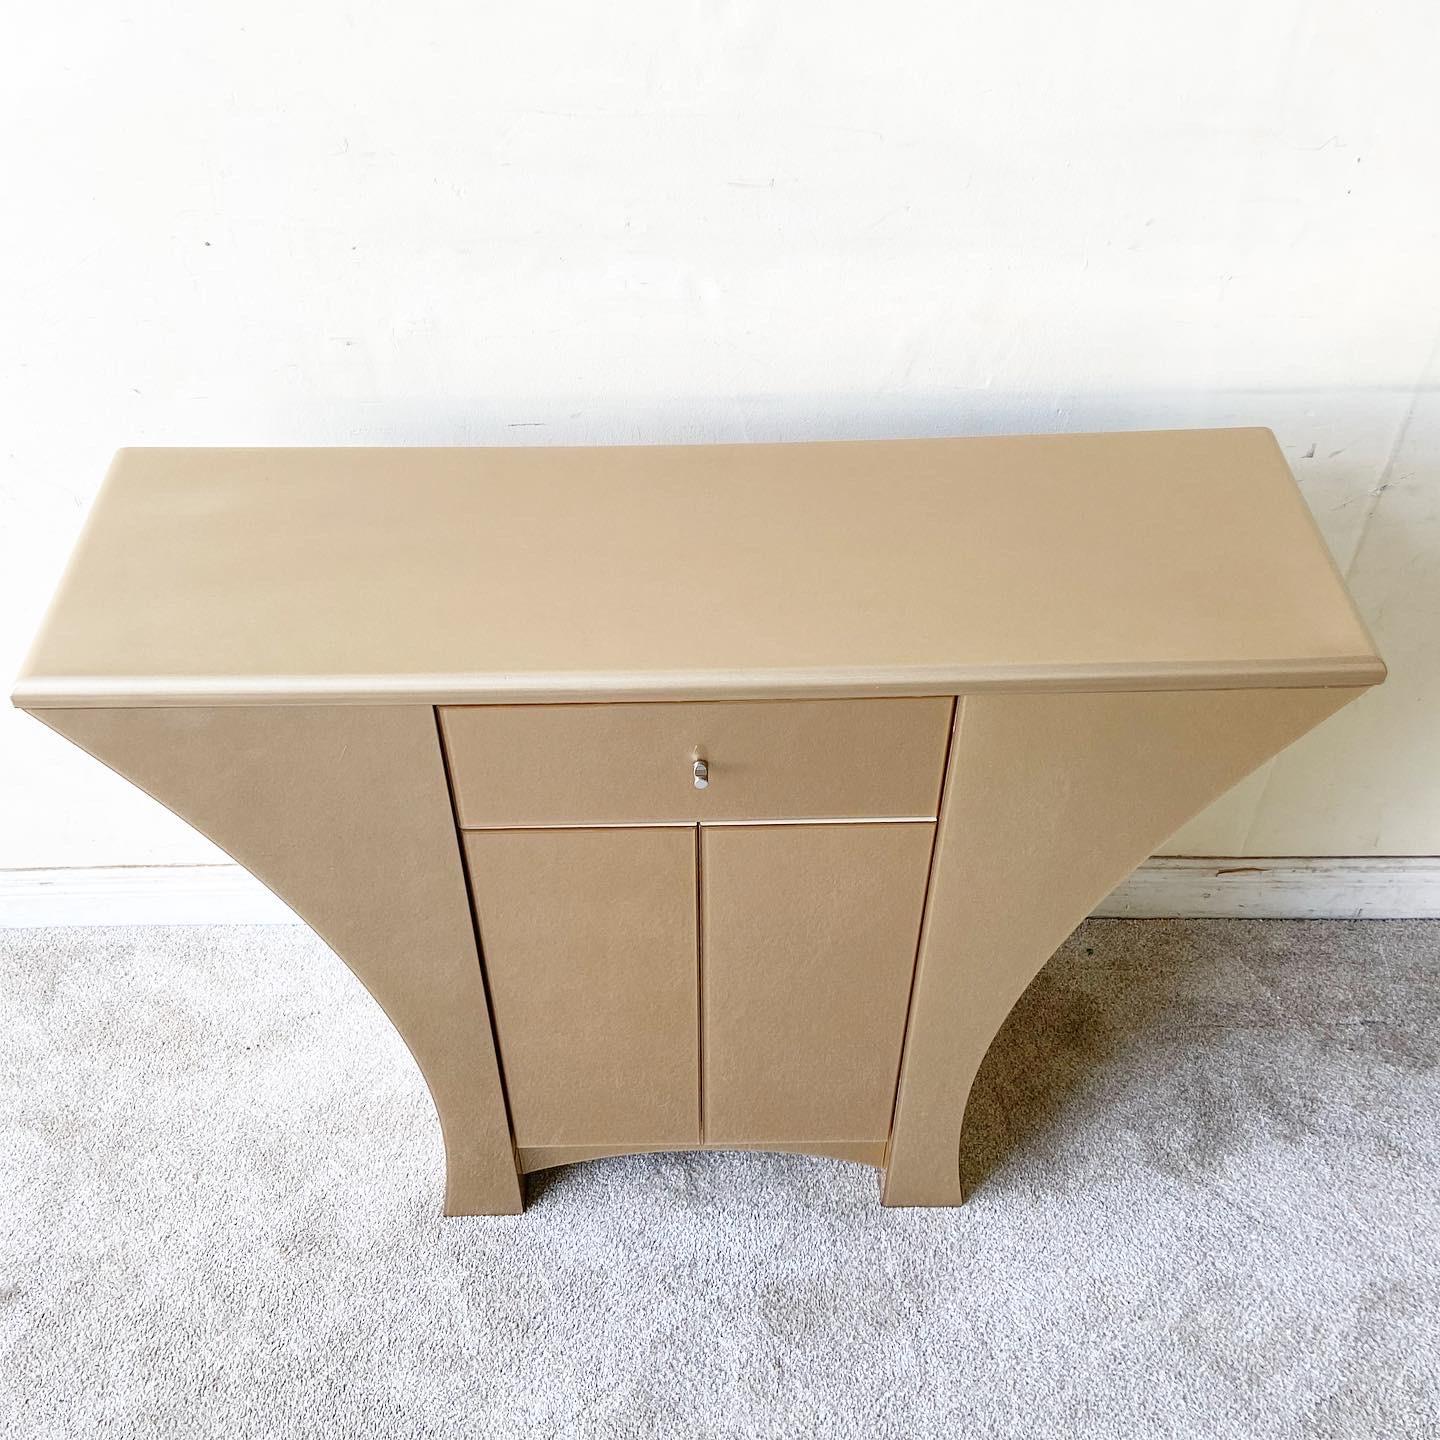 Exceptional art deco/post modern sideboard/credenza. Features a very interesting acrylic over gold frame. The top is lacquered gold and there is one drawer with a cabinet space underneath.